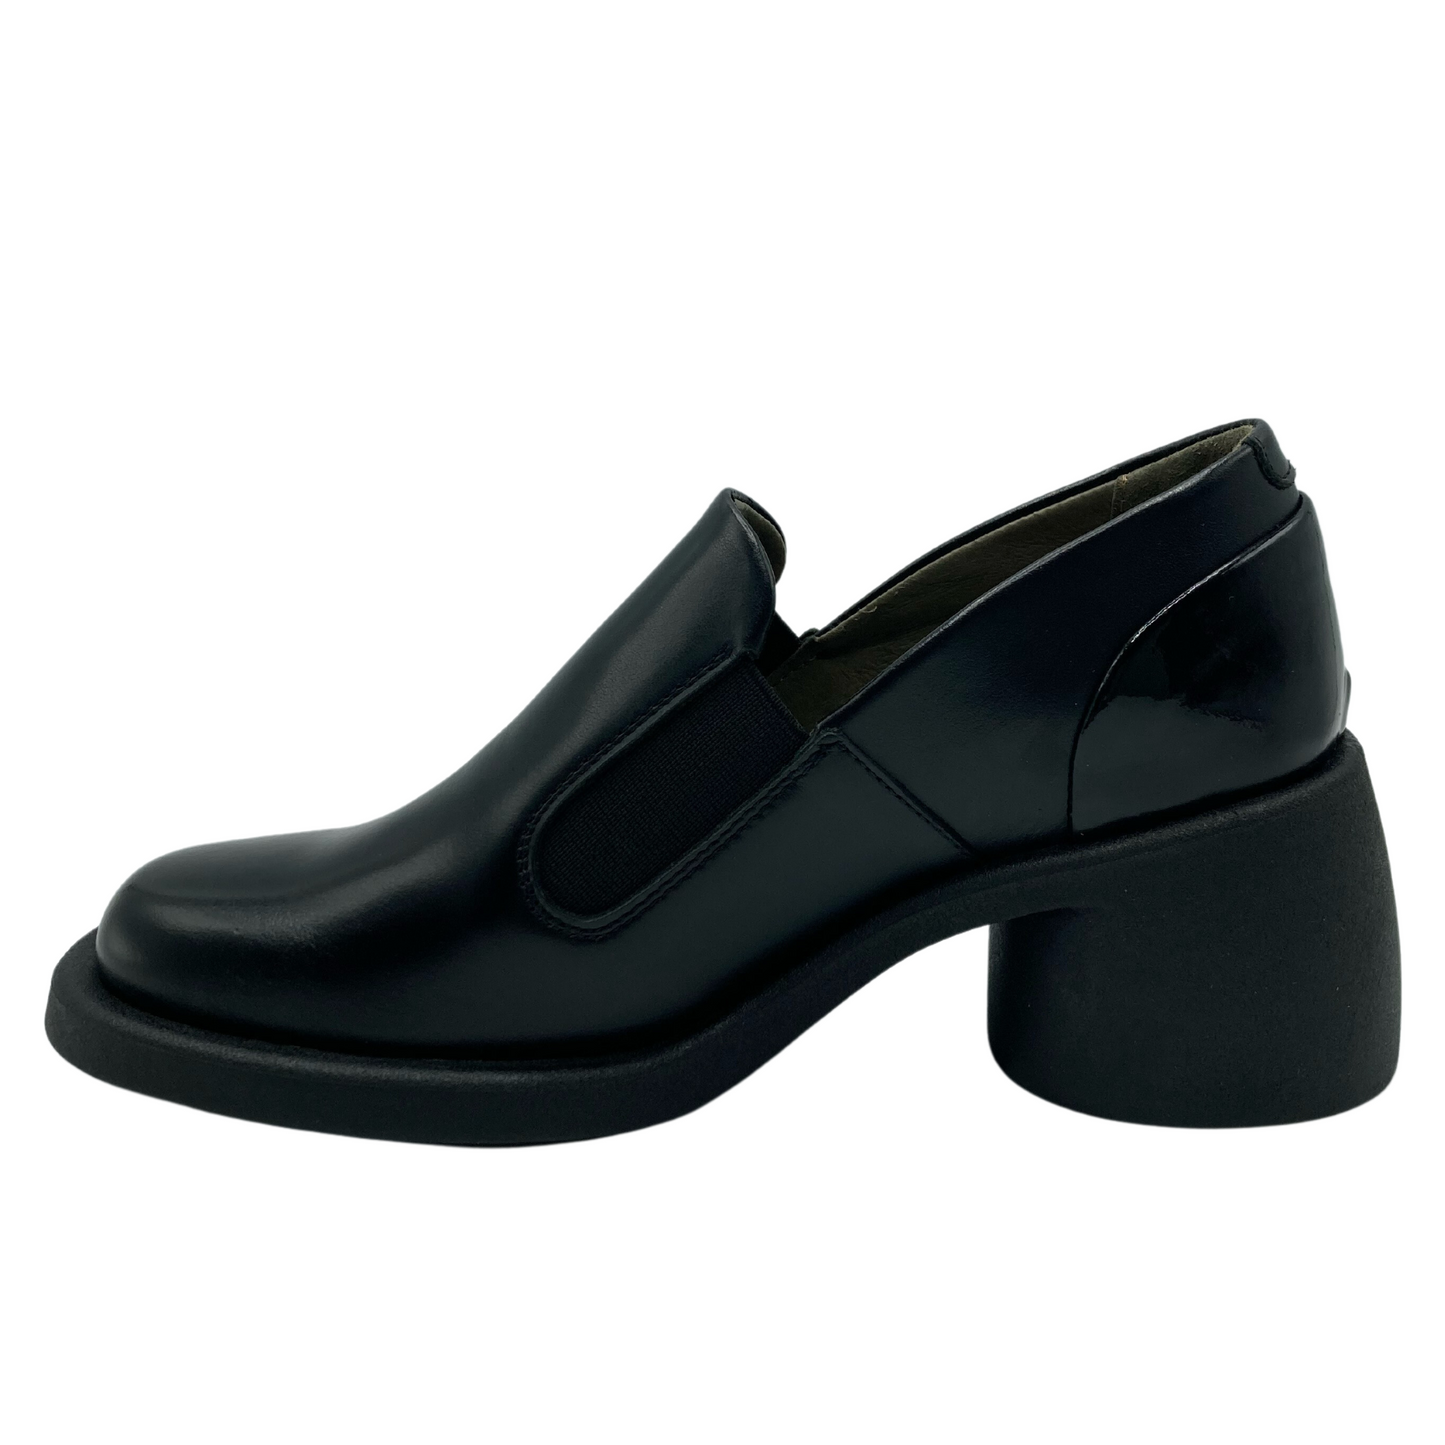 Left facing view of black leather loafer with chunky black heel and elastic gore